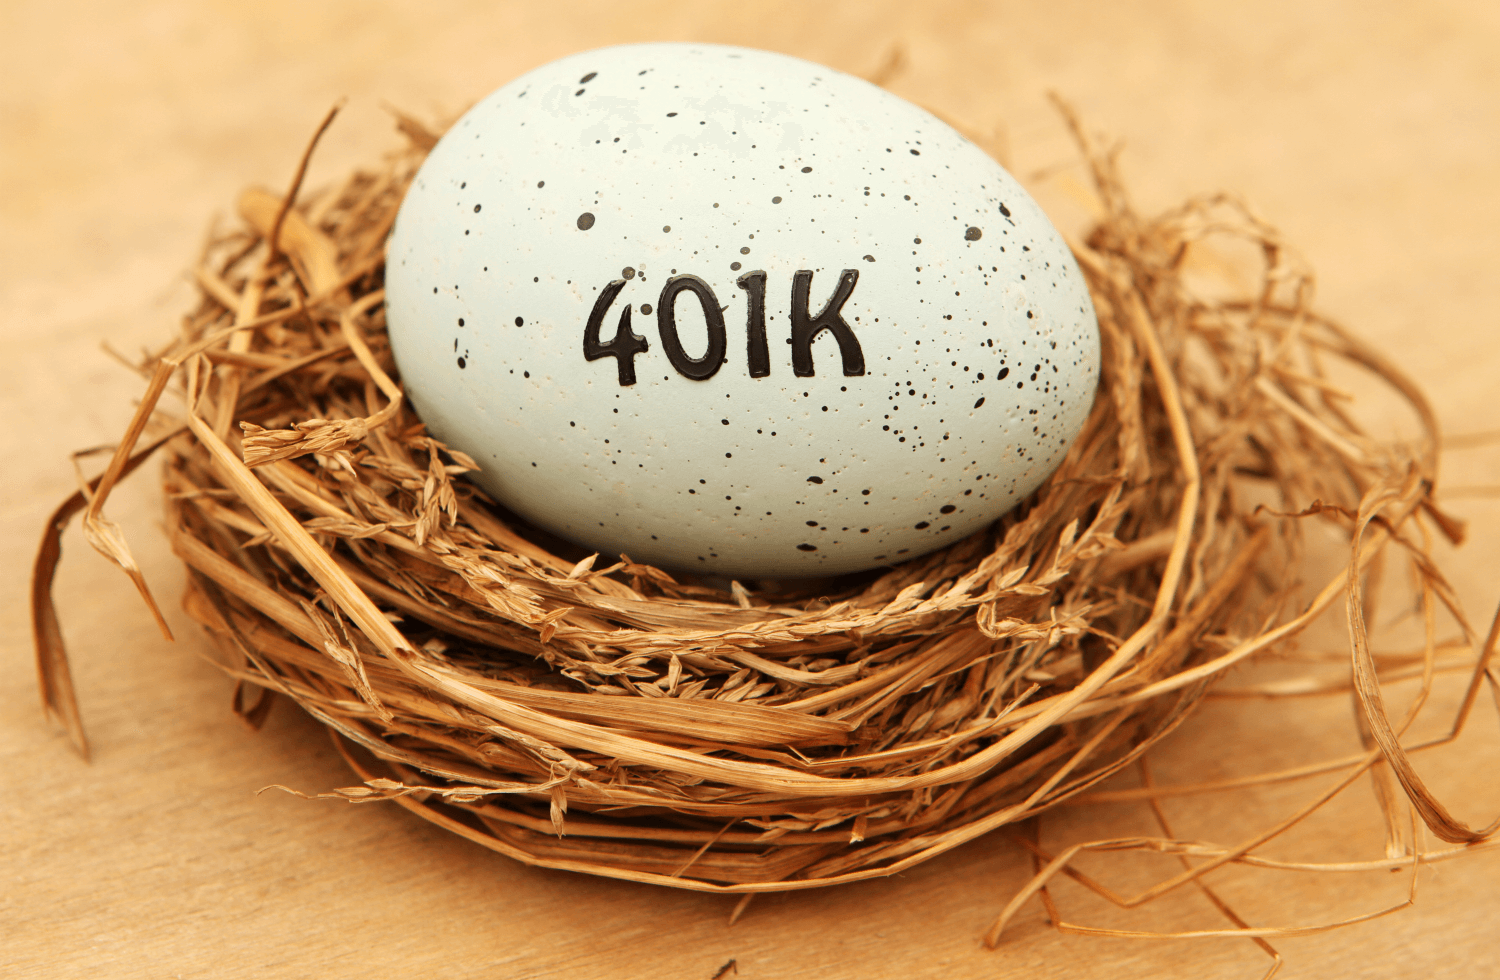 Employees may have the opportunity to take advantage of employer-sponsored 401(k) retirement savings plans which can provide you with certain tax advantages.